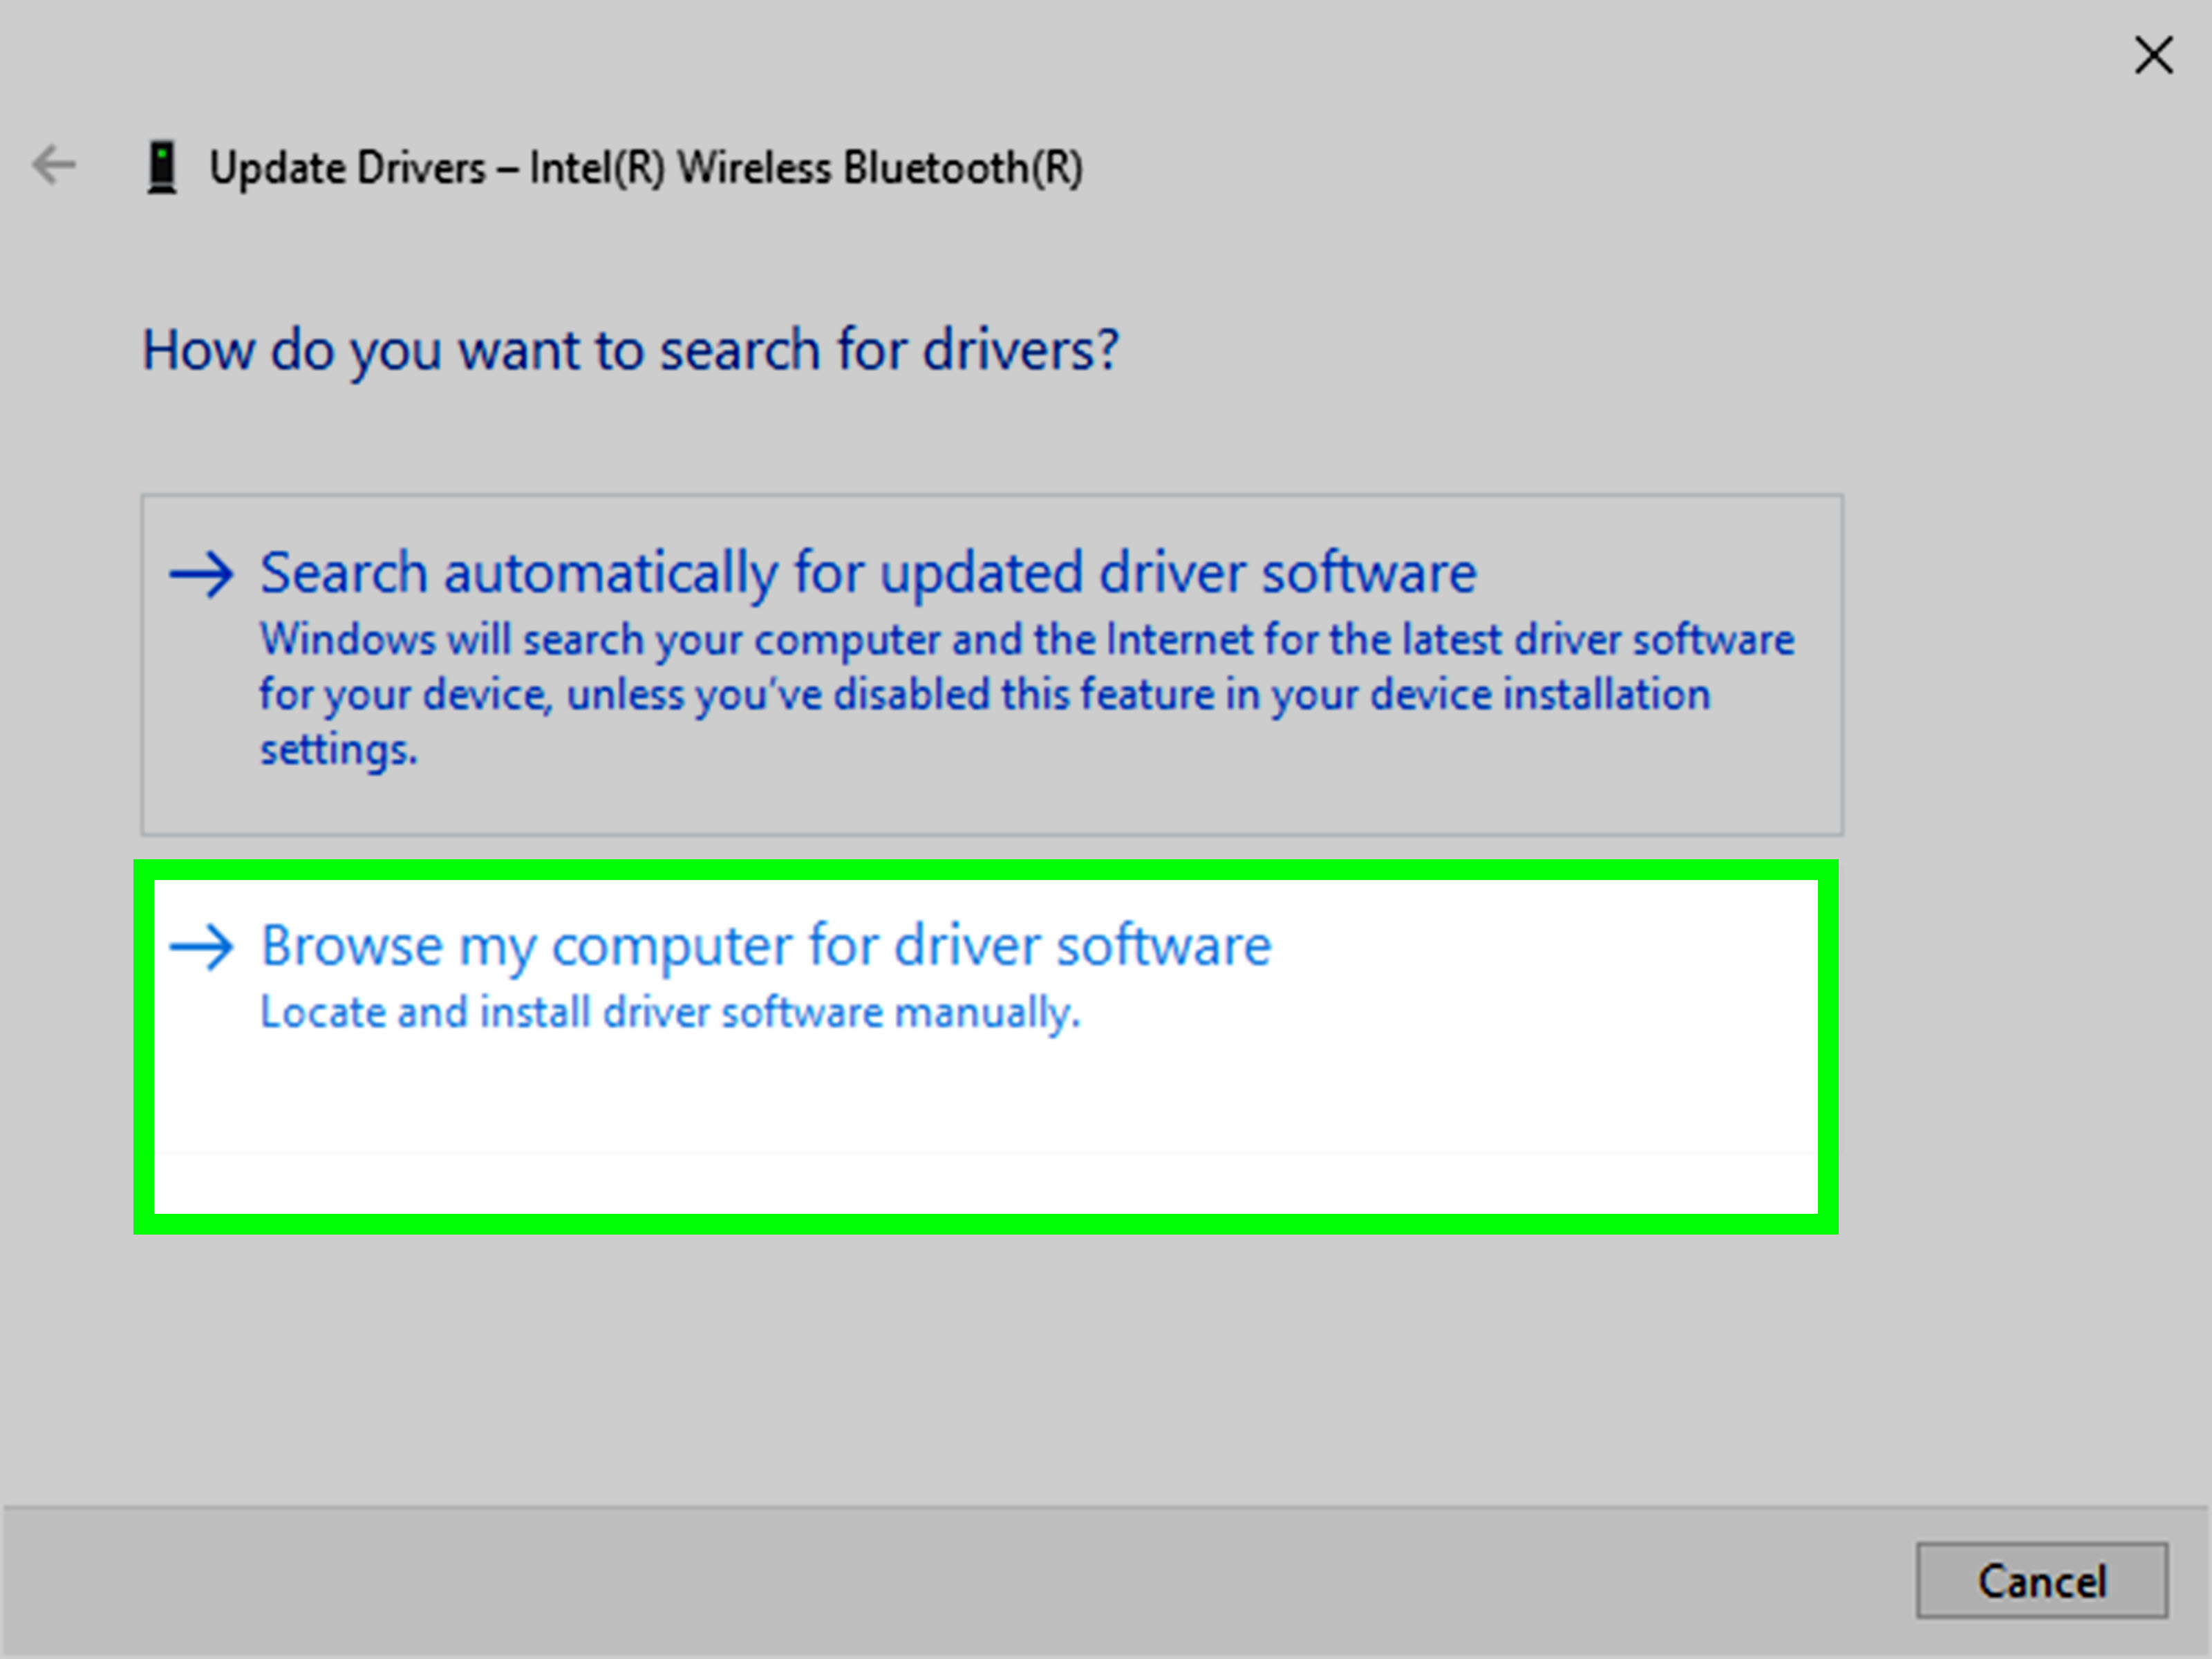 Wait for the search to complete
If an updated driver is found, follow the prompts to install it